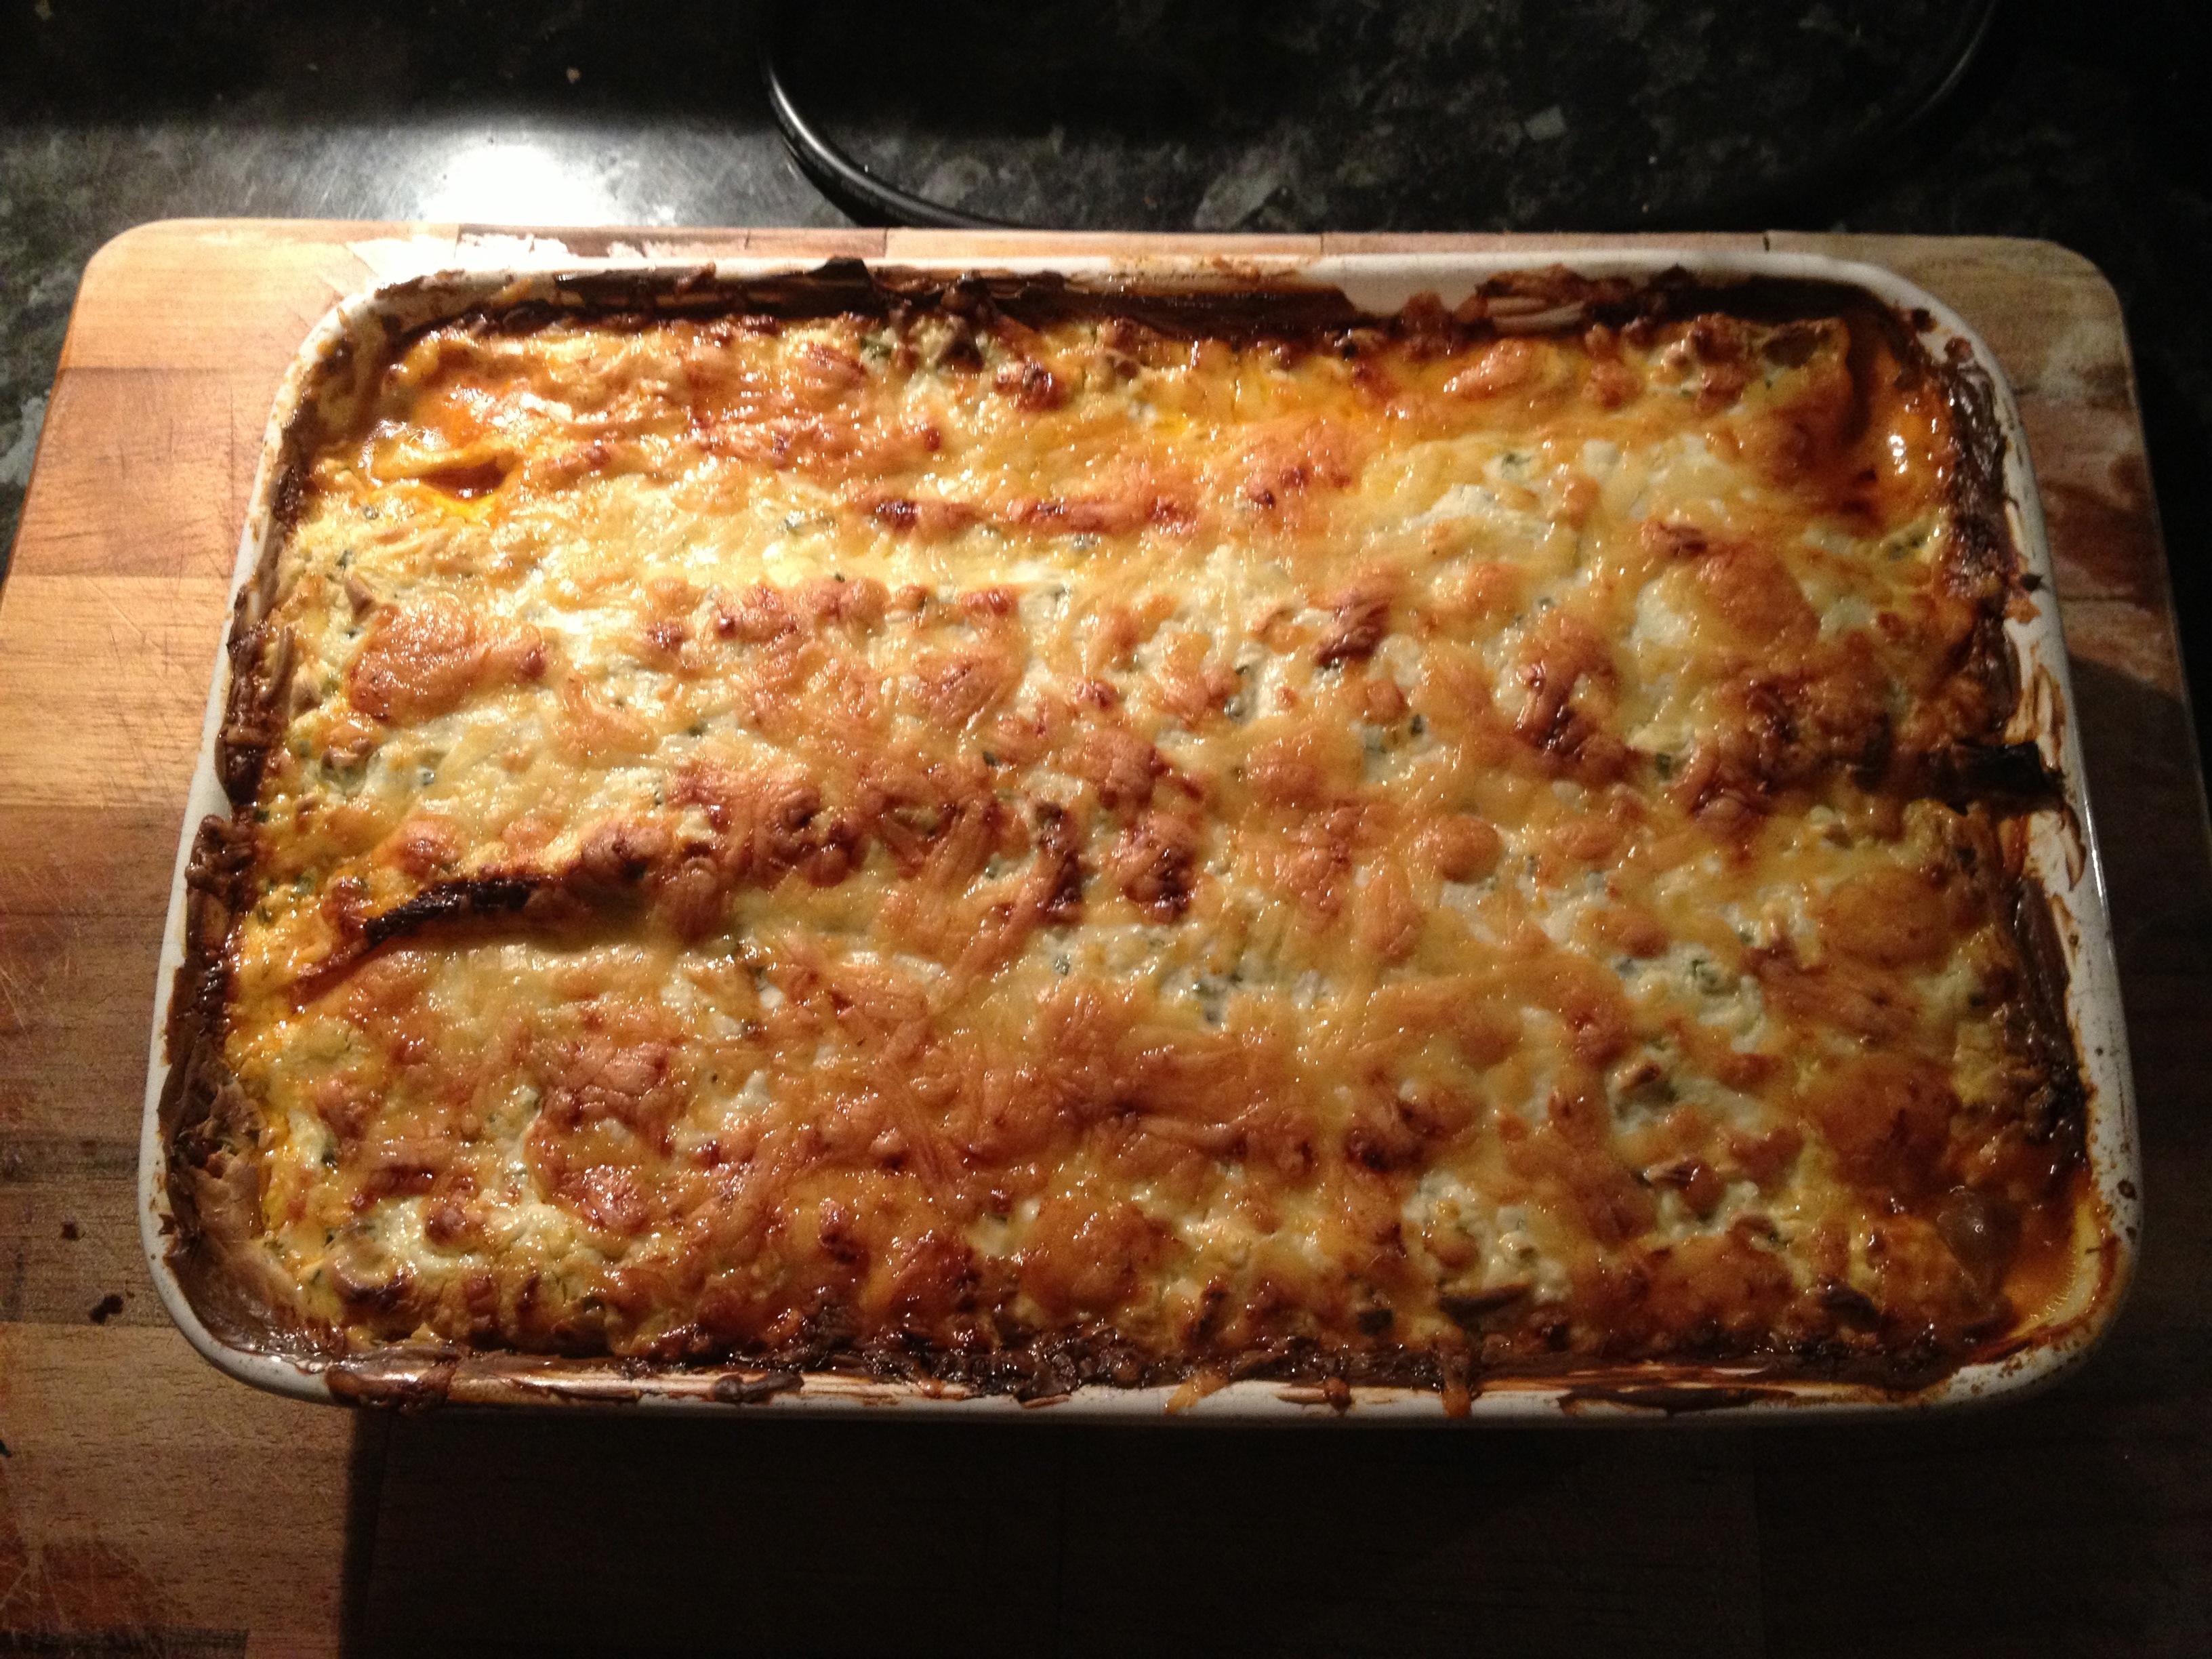 www.hoylesfitness.com, lasagne, low carb, low starch, weight loss, nutrition, gluten free